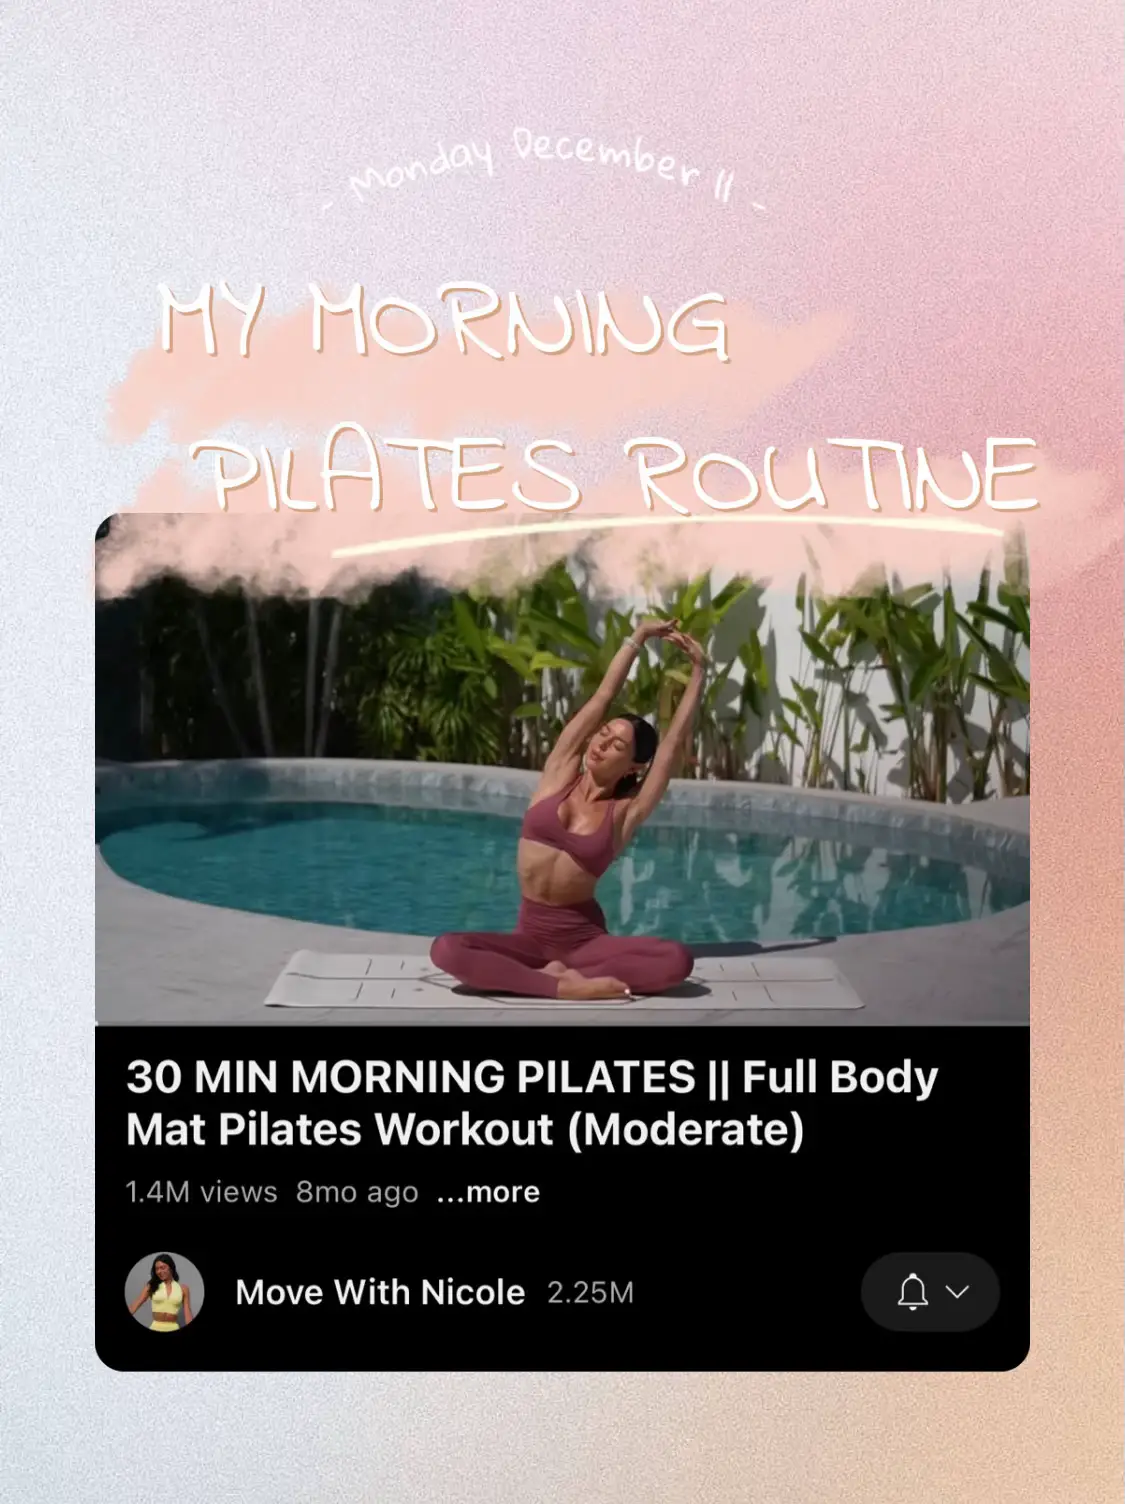  Prevention- 10 Minute Pilates: The Sculpting Pilates Workout  That Does It All in 10 Minutes - A Perfect Start to a Healthy Fitness  Journey At-Home! : Movies & TV